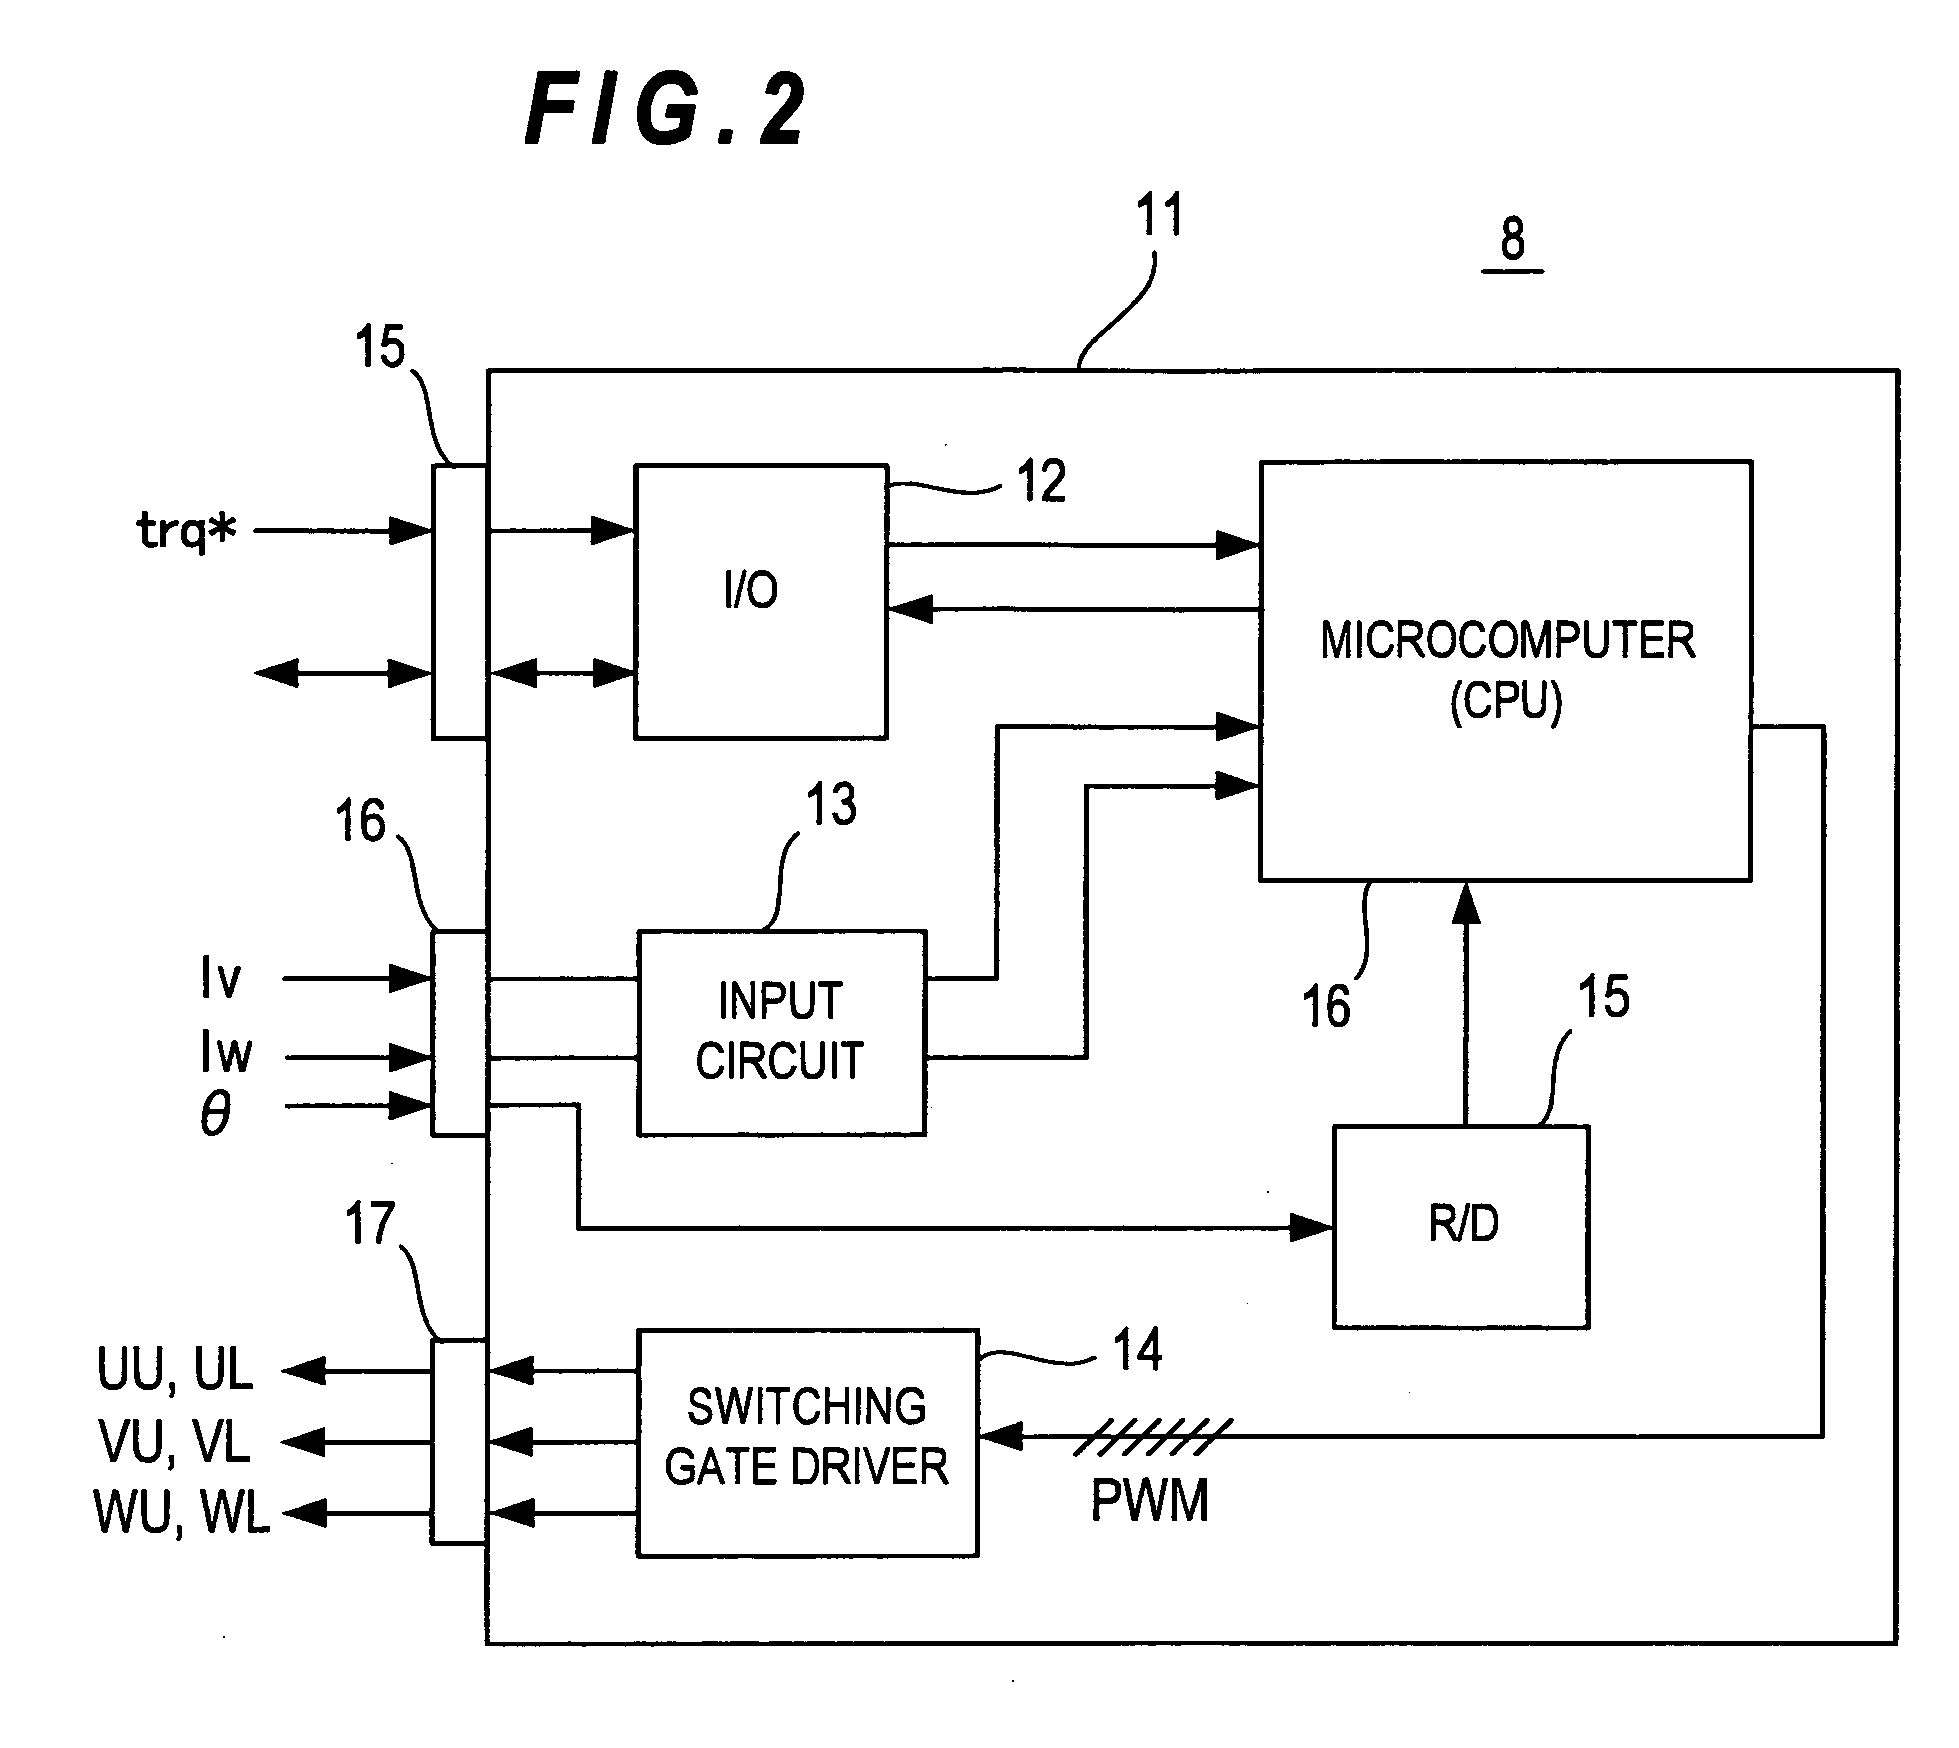 Apparatus for controlling three-phase AC motor on two-phase modulation technique